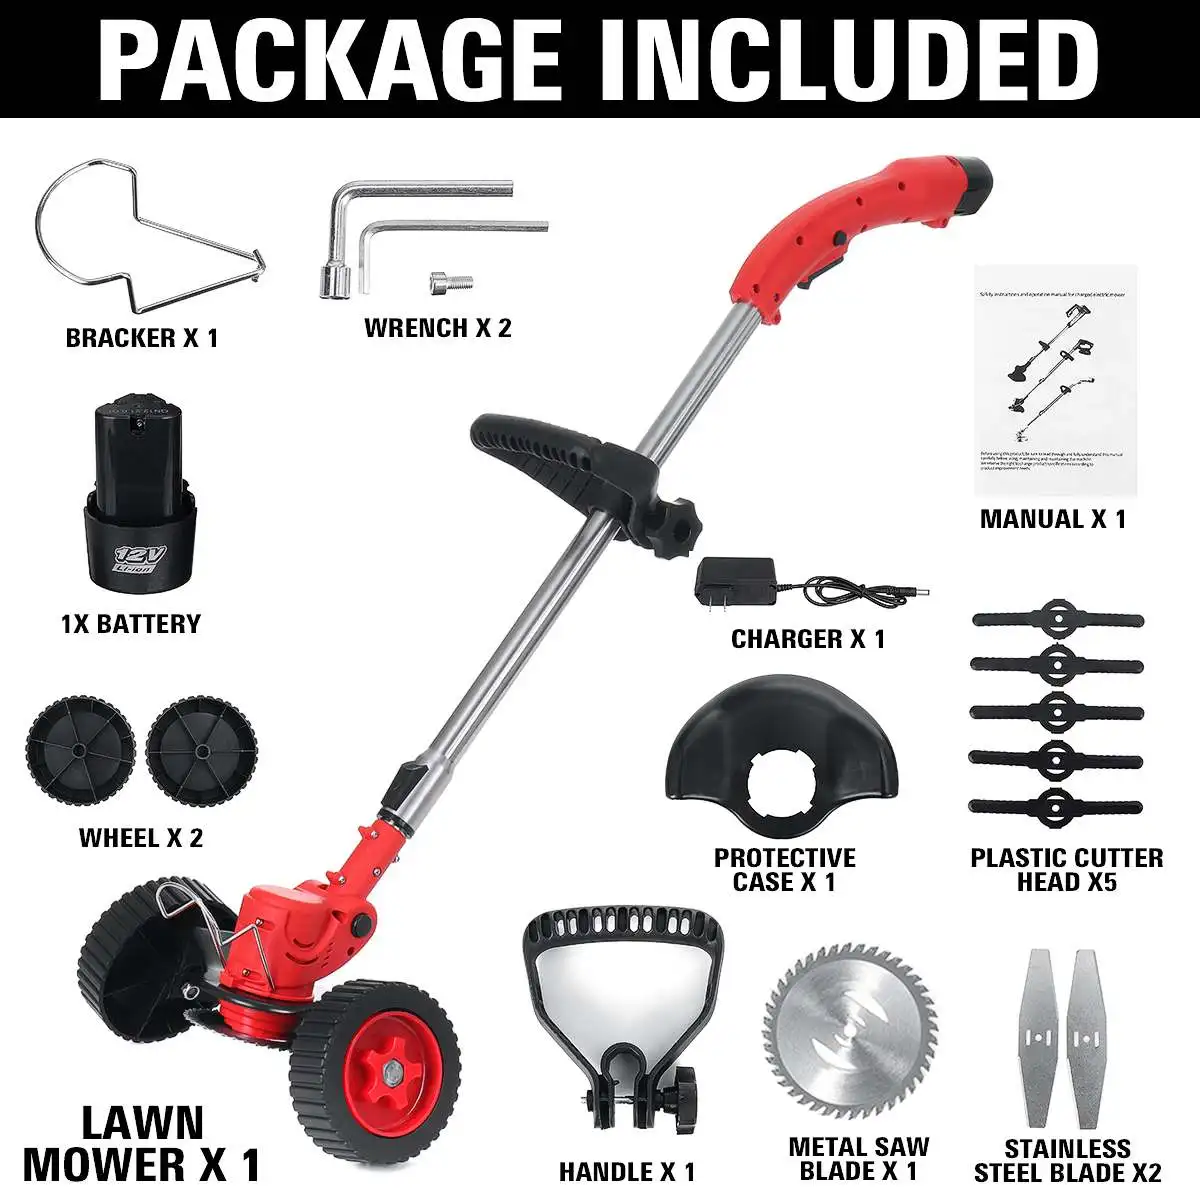 https://ae01.alicdn.com/kf/H24fdcf99ad9f4033908f8023c6a23951N/600W-Electric-Grass-Trimmer-Cordless-Lawn-Mower-Hedge-Trimmer-Adjustable-Handheld-Garden-Pruning-Power-Tool-with.jpeg